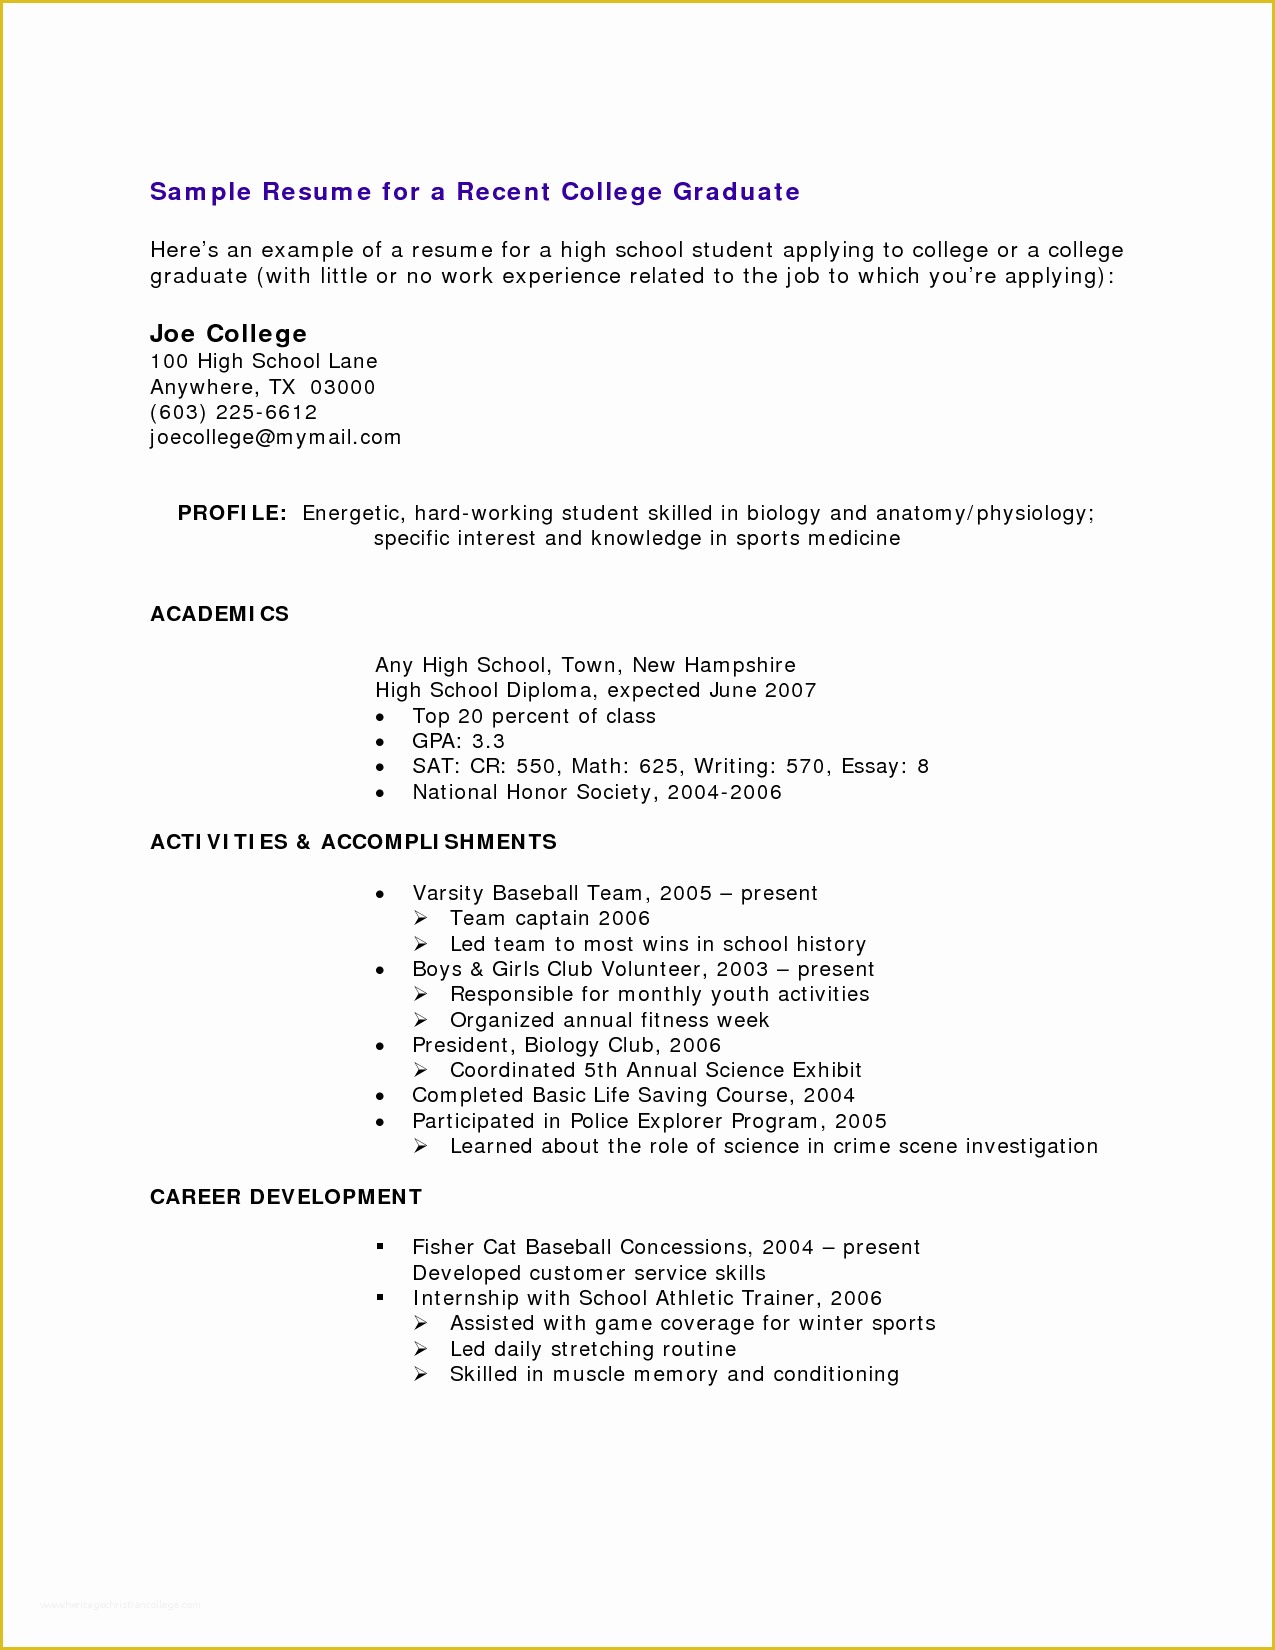 Free Job Specific Resume Templates Of Resumes Templates for Students with No Experience